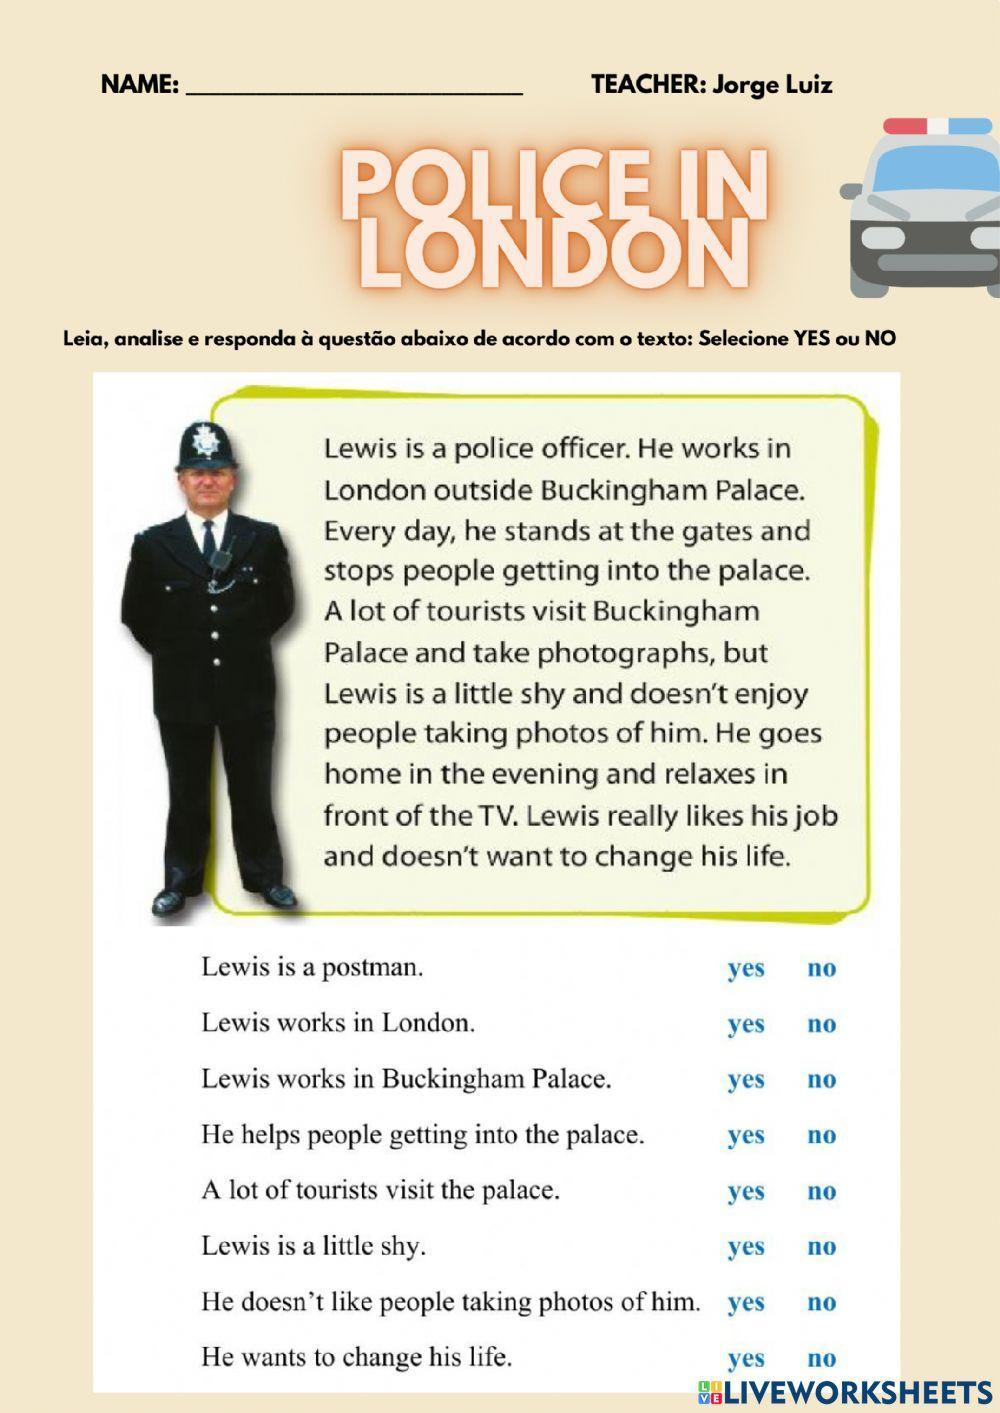 Police of London